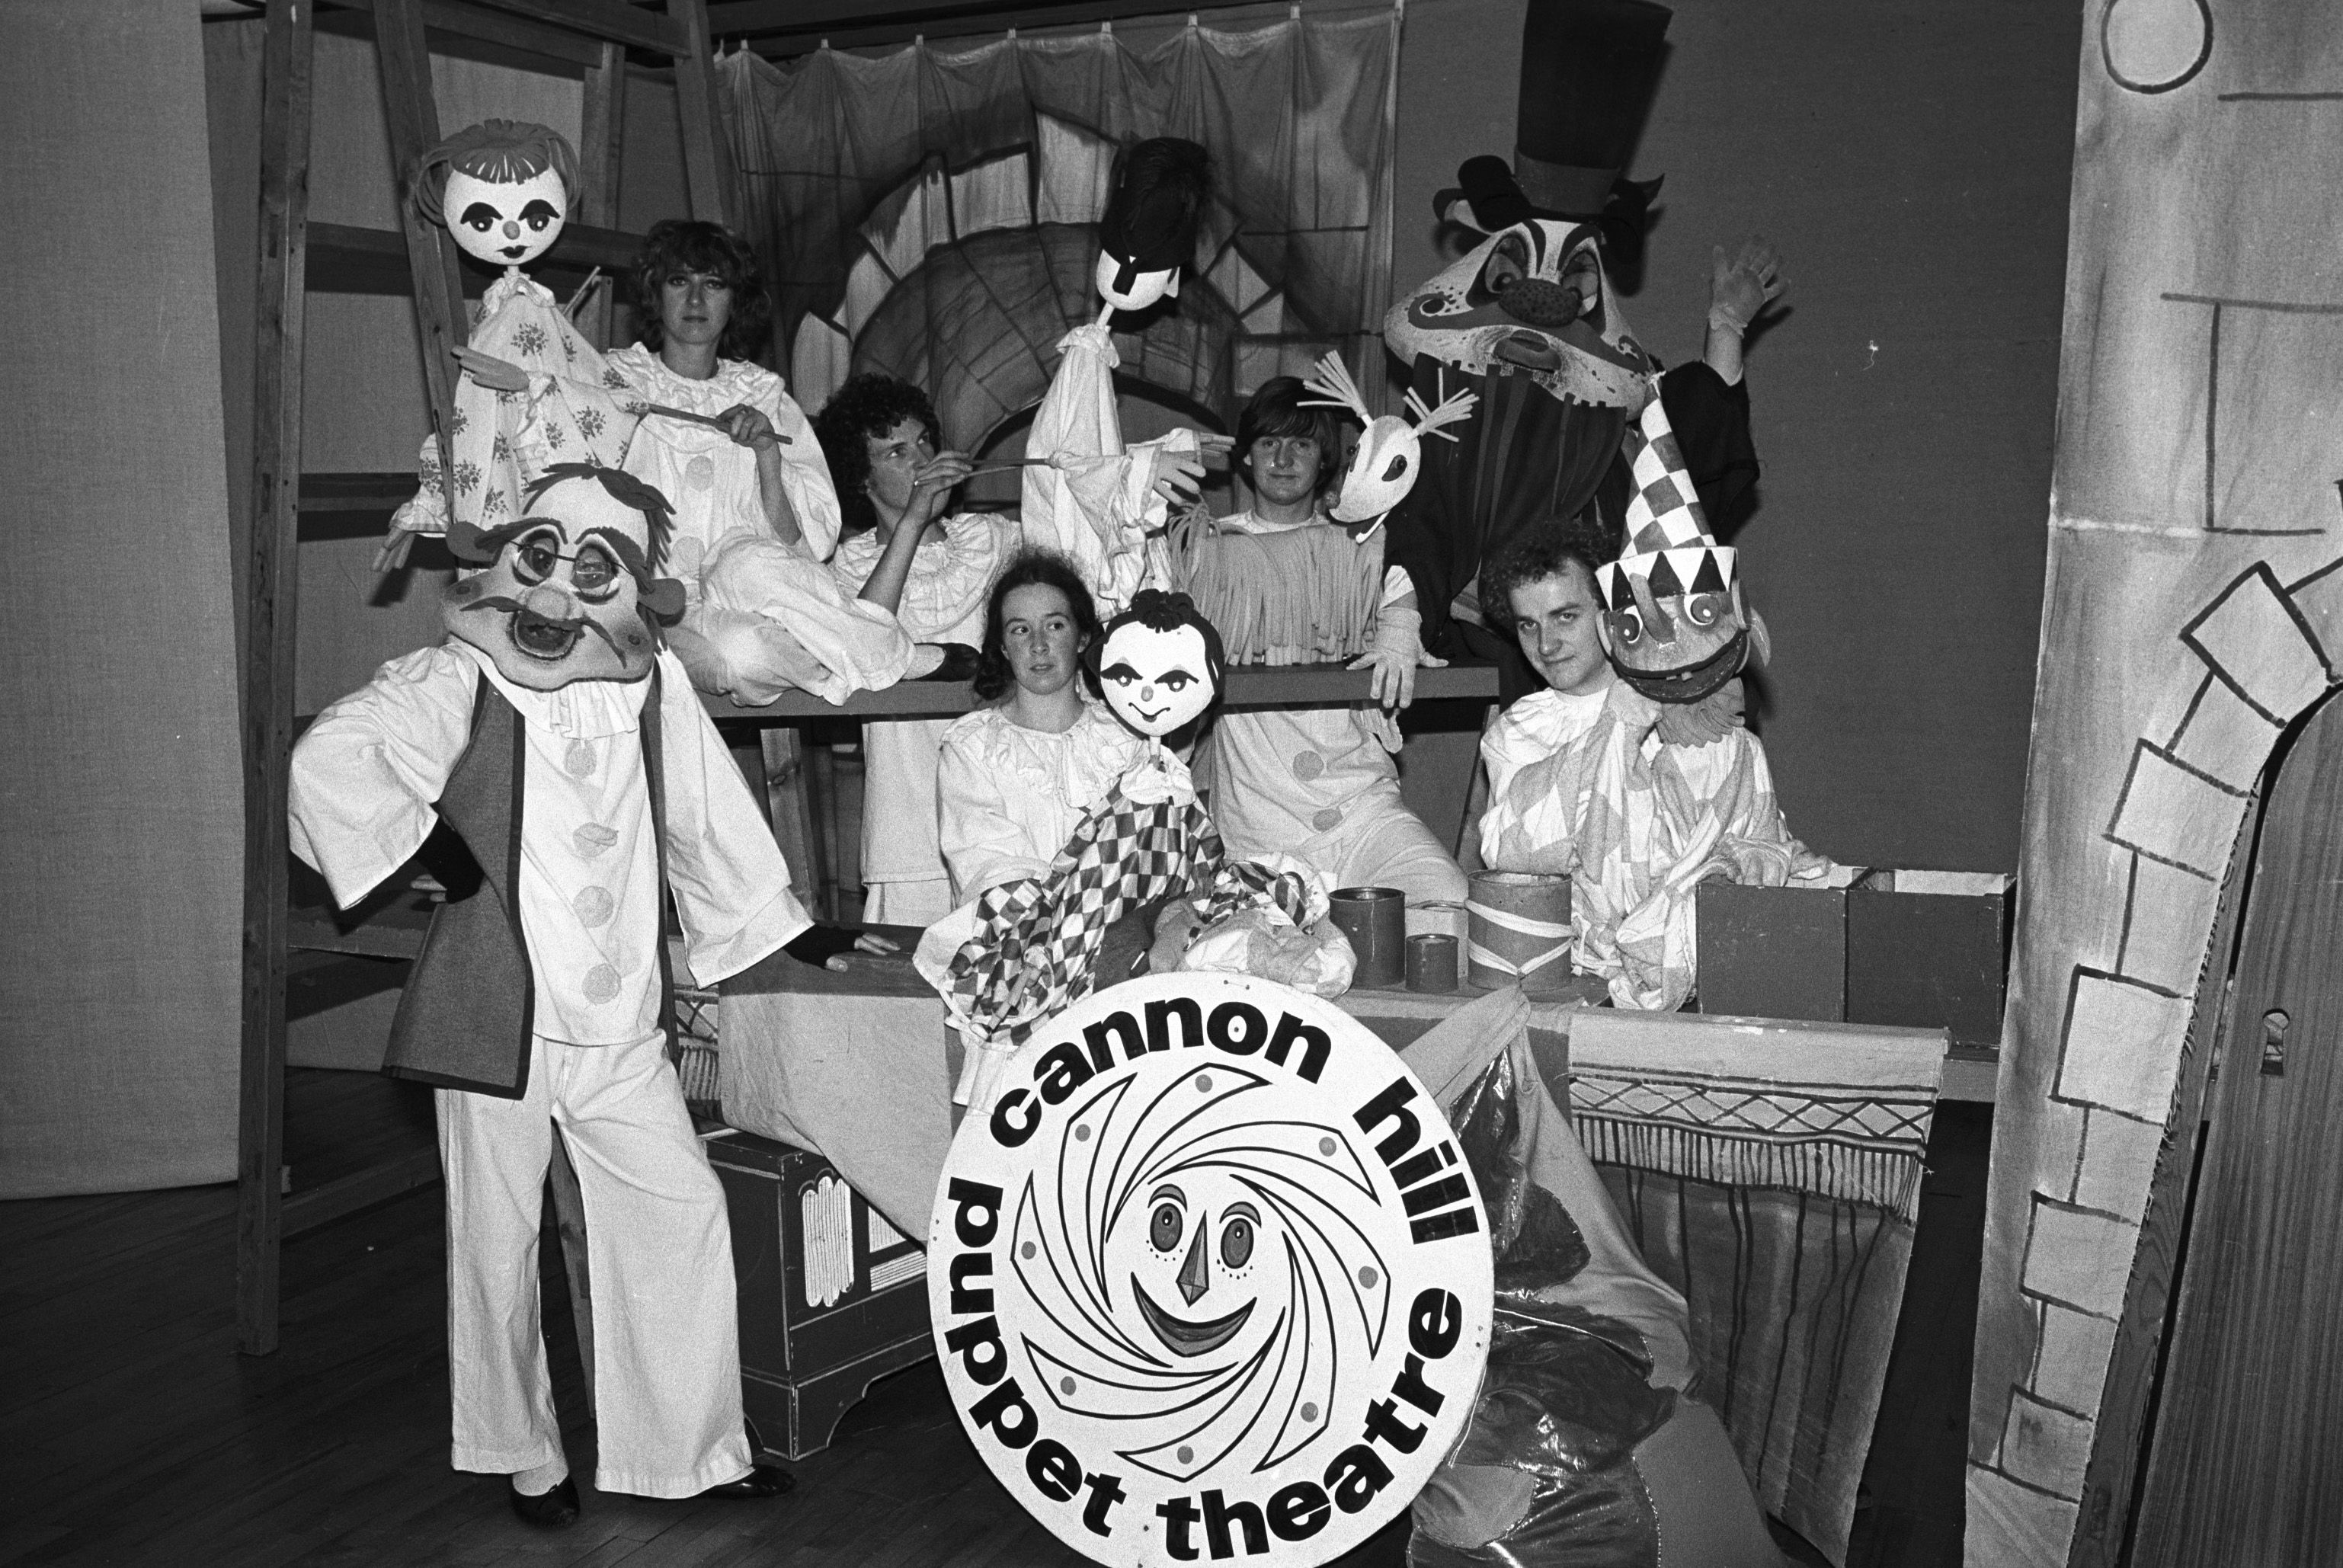 SPECIAL SHOW: Cannon Hill Puppets appeared in Andersonstown Leisure Centre in November 1980